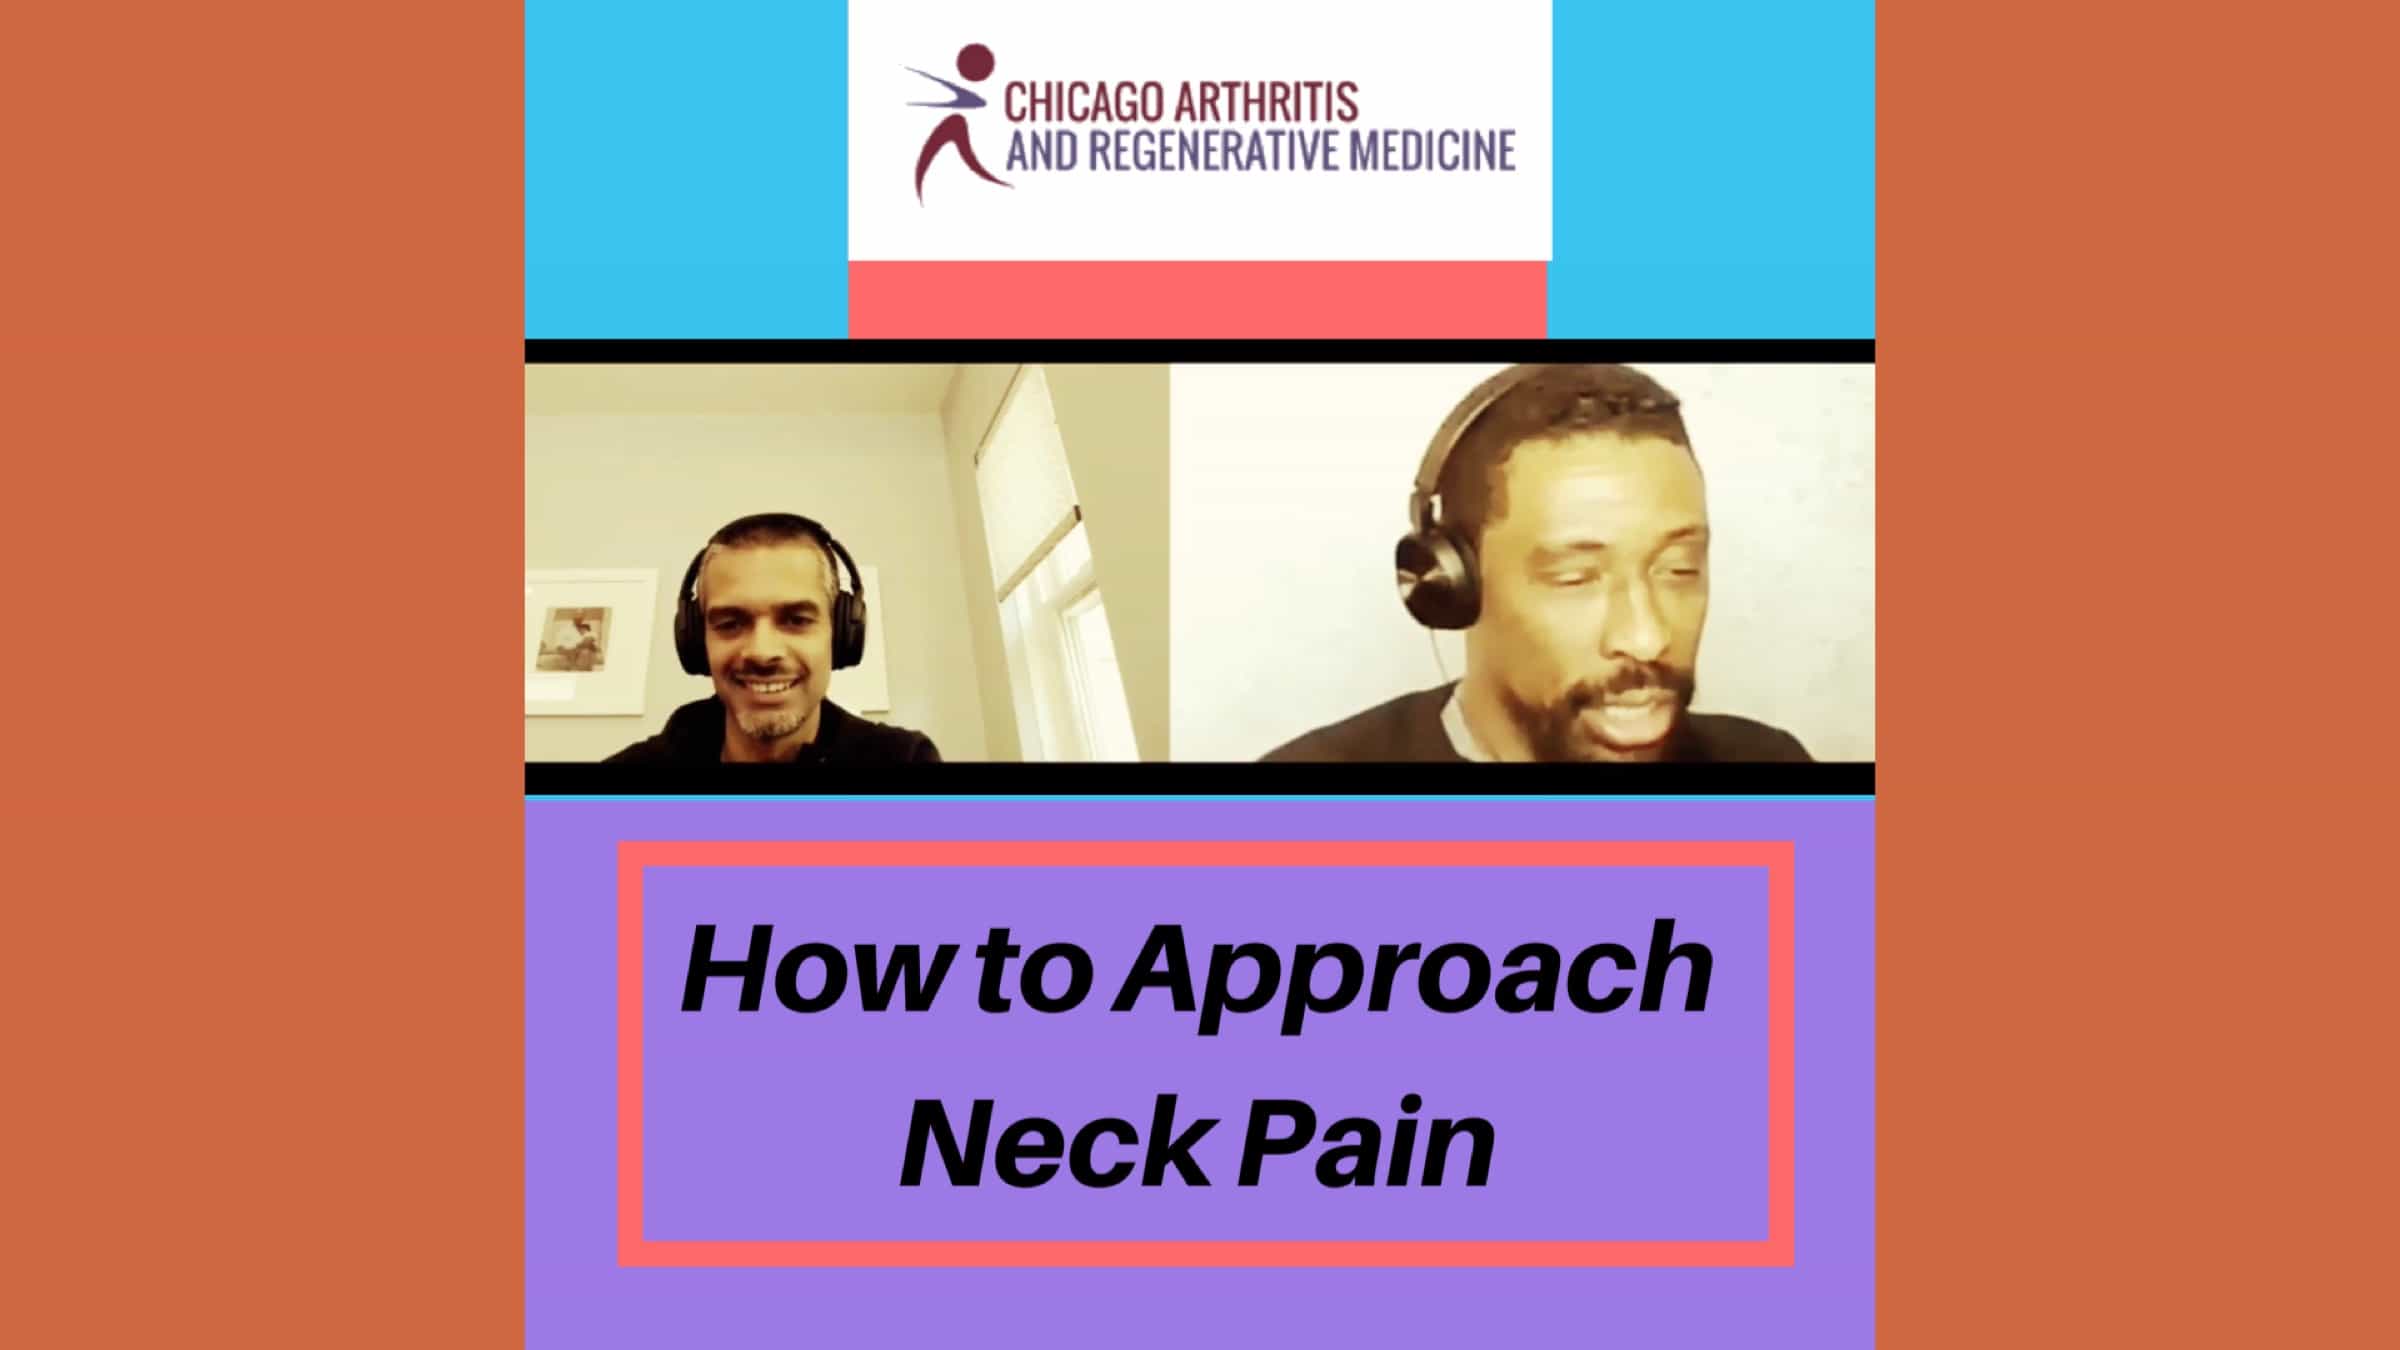 How to approach Neck pain